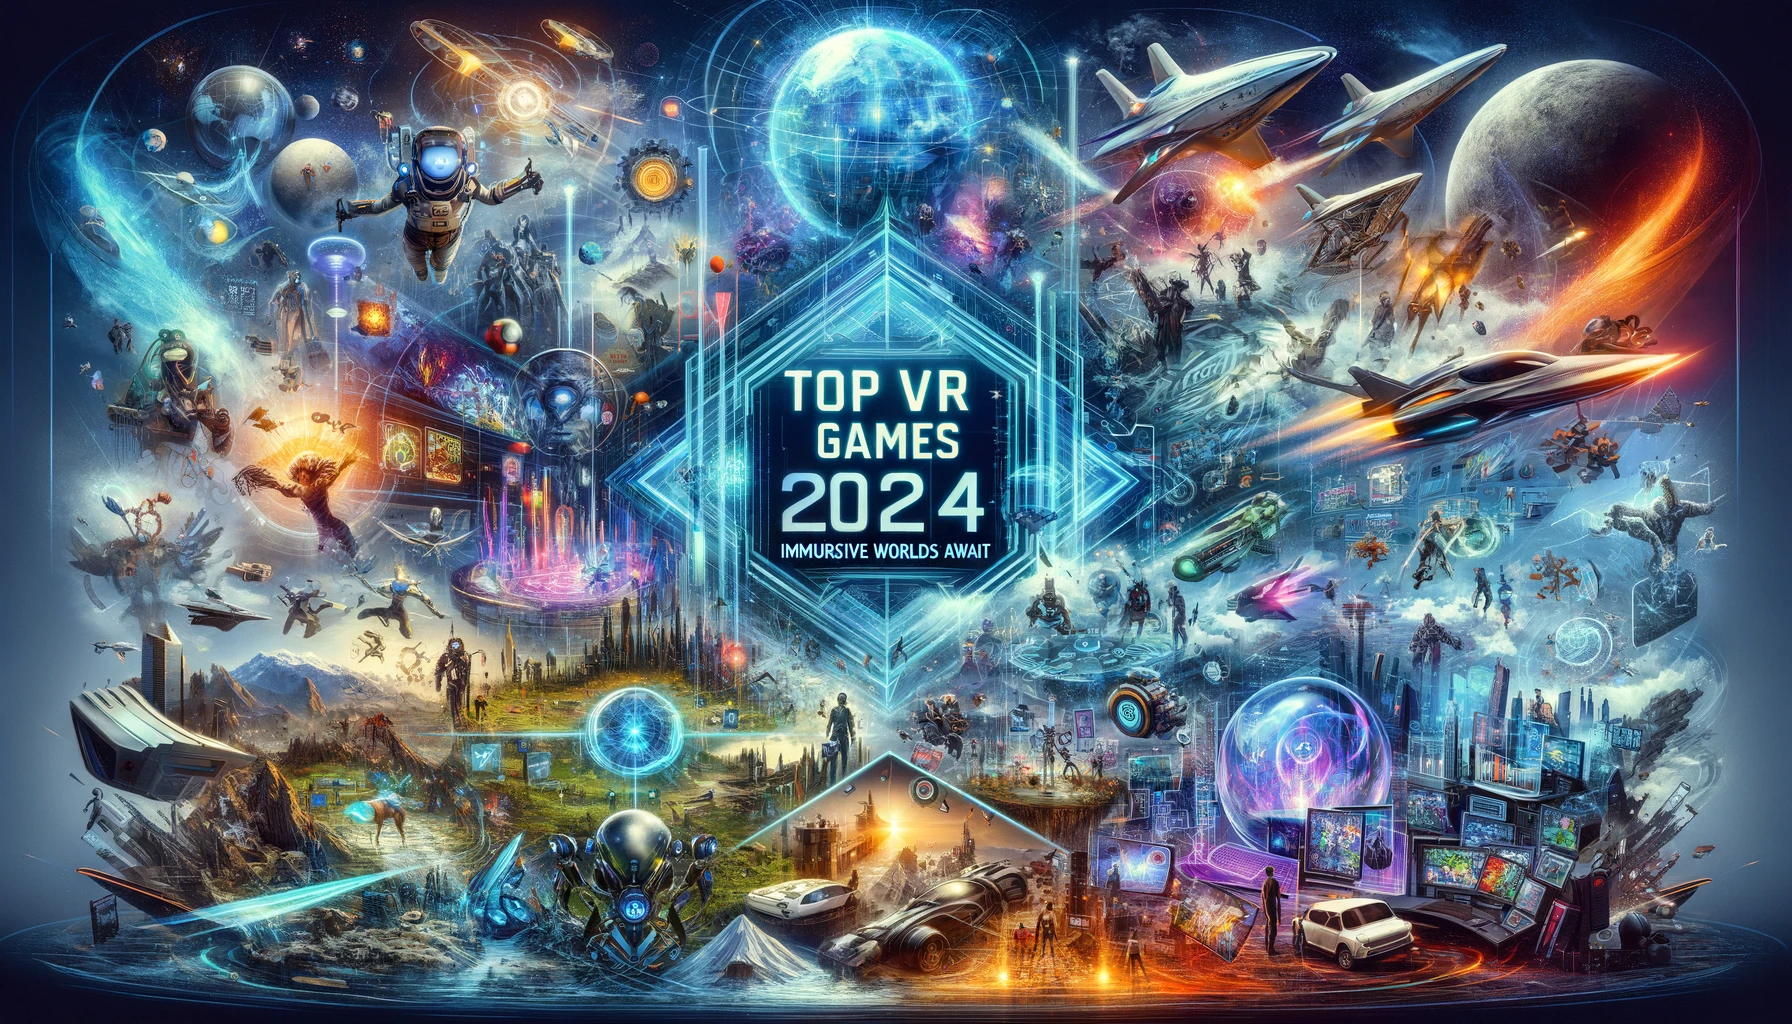 Explore the top VR games of 2024! From breathtaking adventures to heart-pounding action, find your next immersive gaming experience.